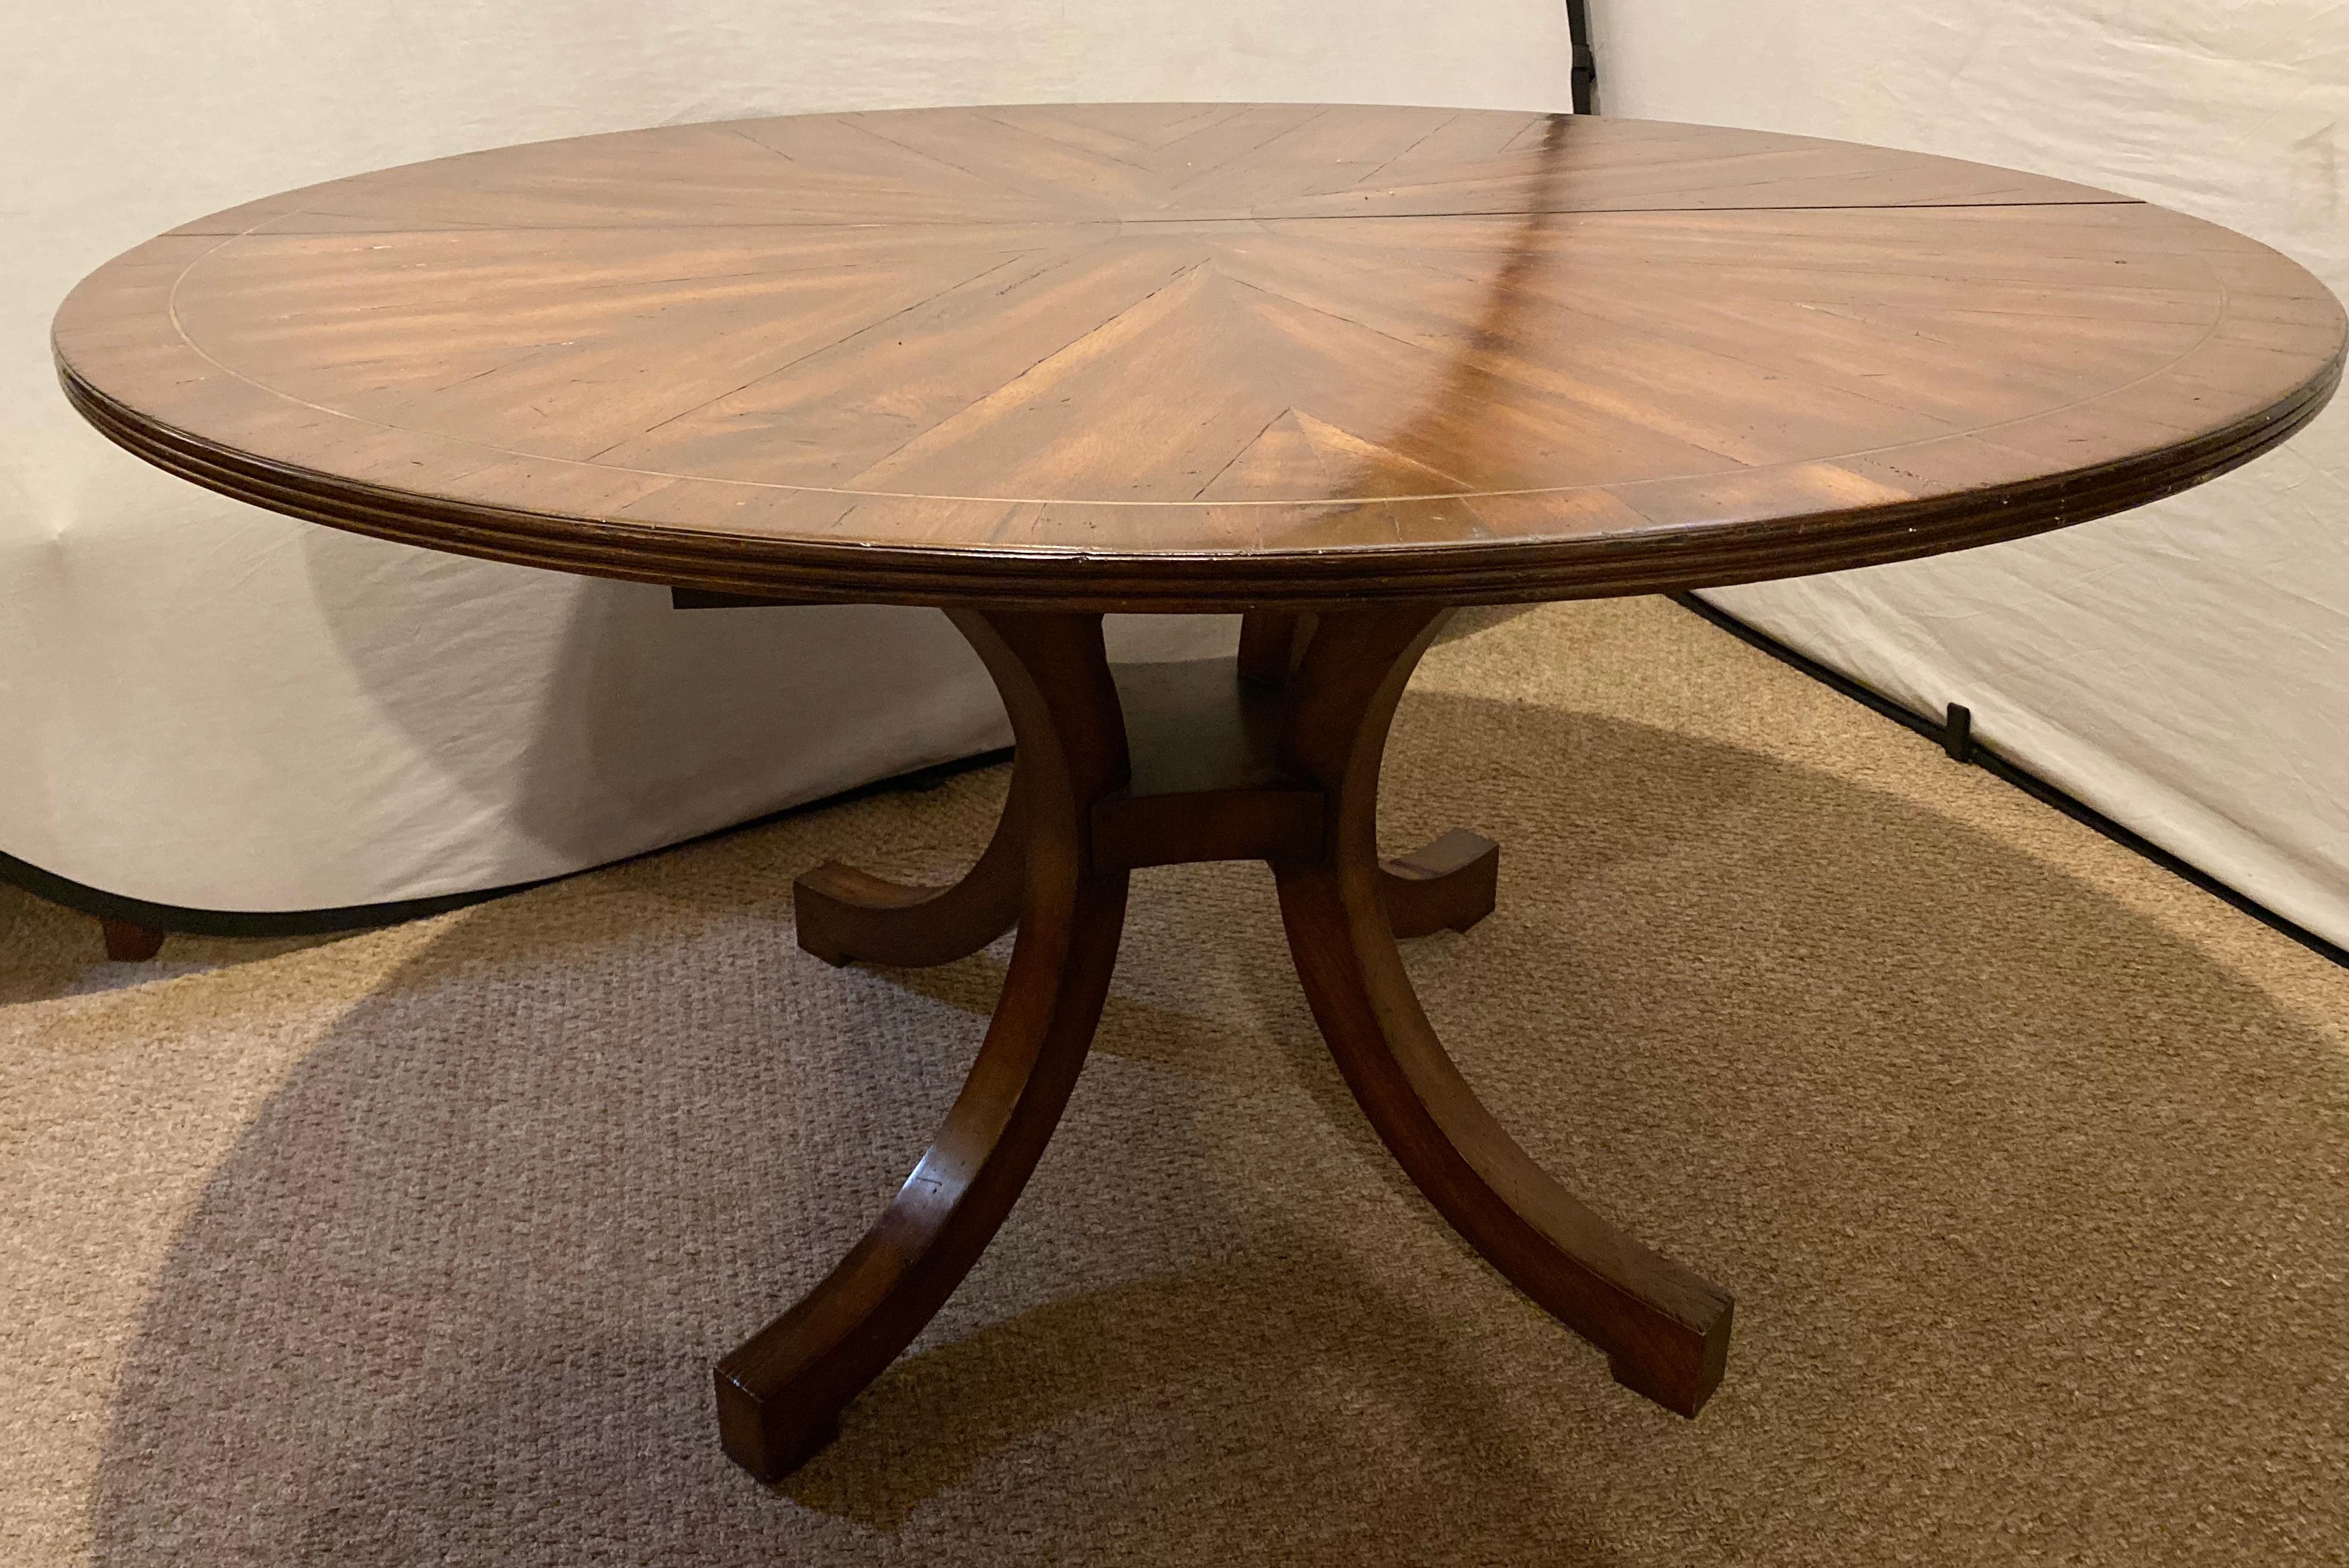 Circular boule inlaid dining, center or kitchen table with a rustic finish. Having a single pedestal on four rustic sprayed legs supporting a boule star burst inlaid table top of solid wood with fine grained finish. This custom dining or kitchen